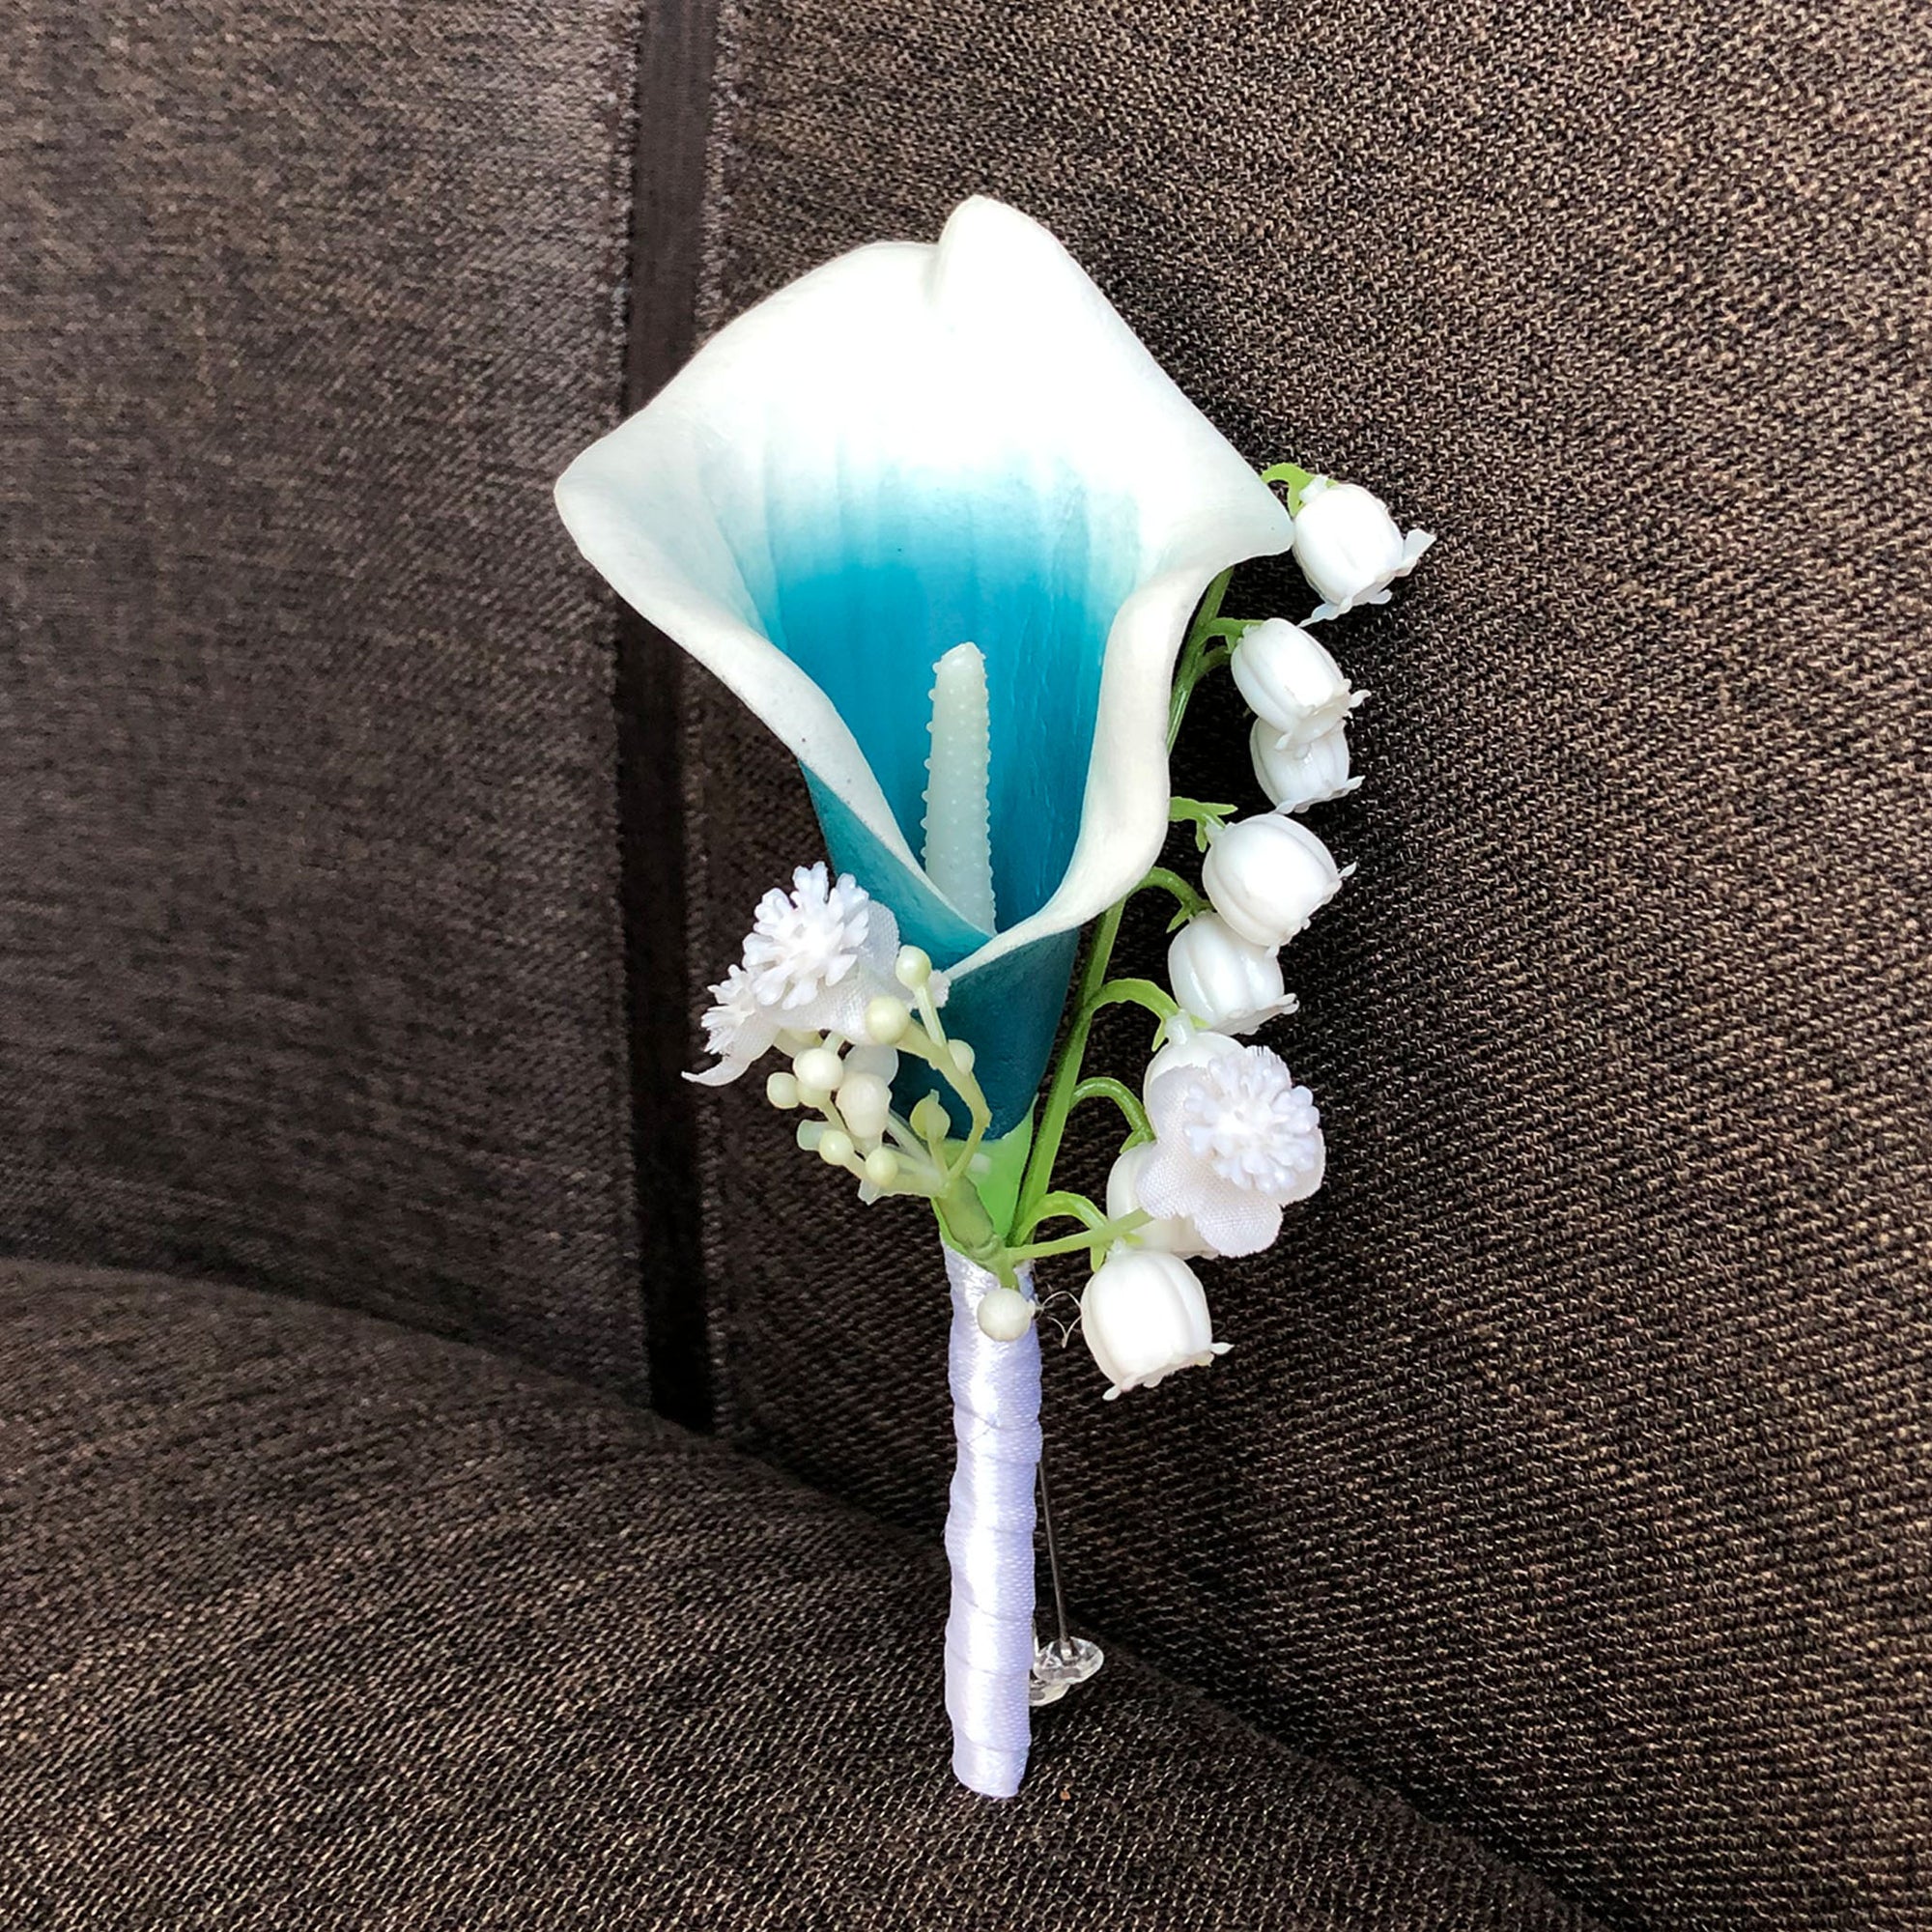 Calla Lily Bouquet Lily of the Valley for Bride Bridesmaids